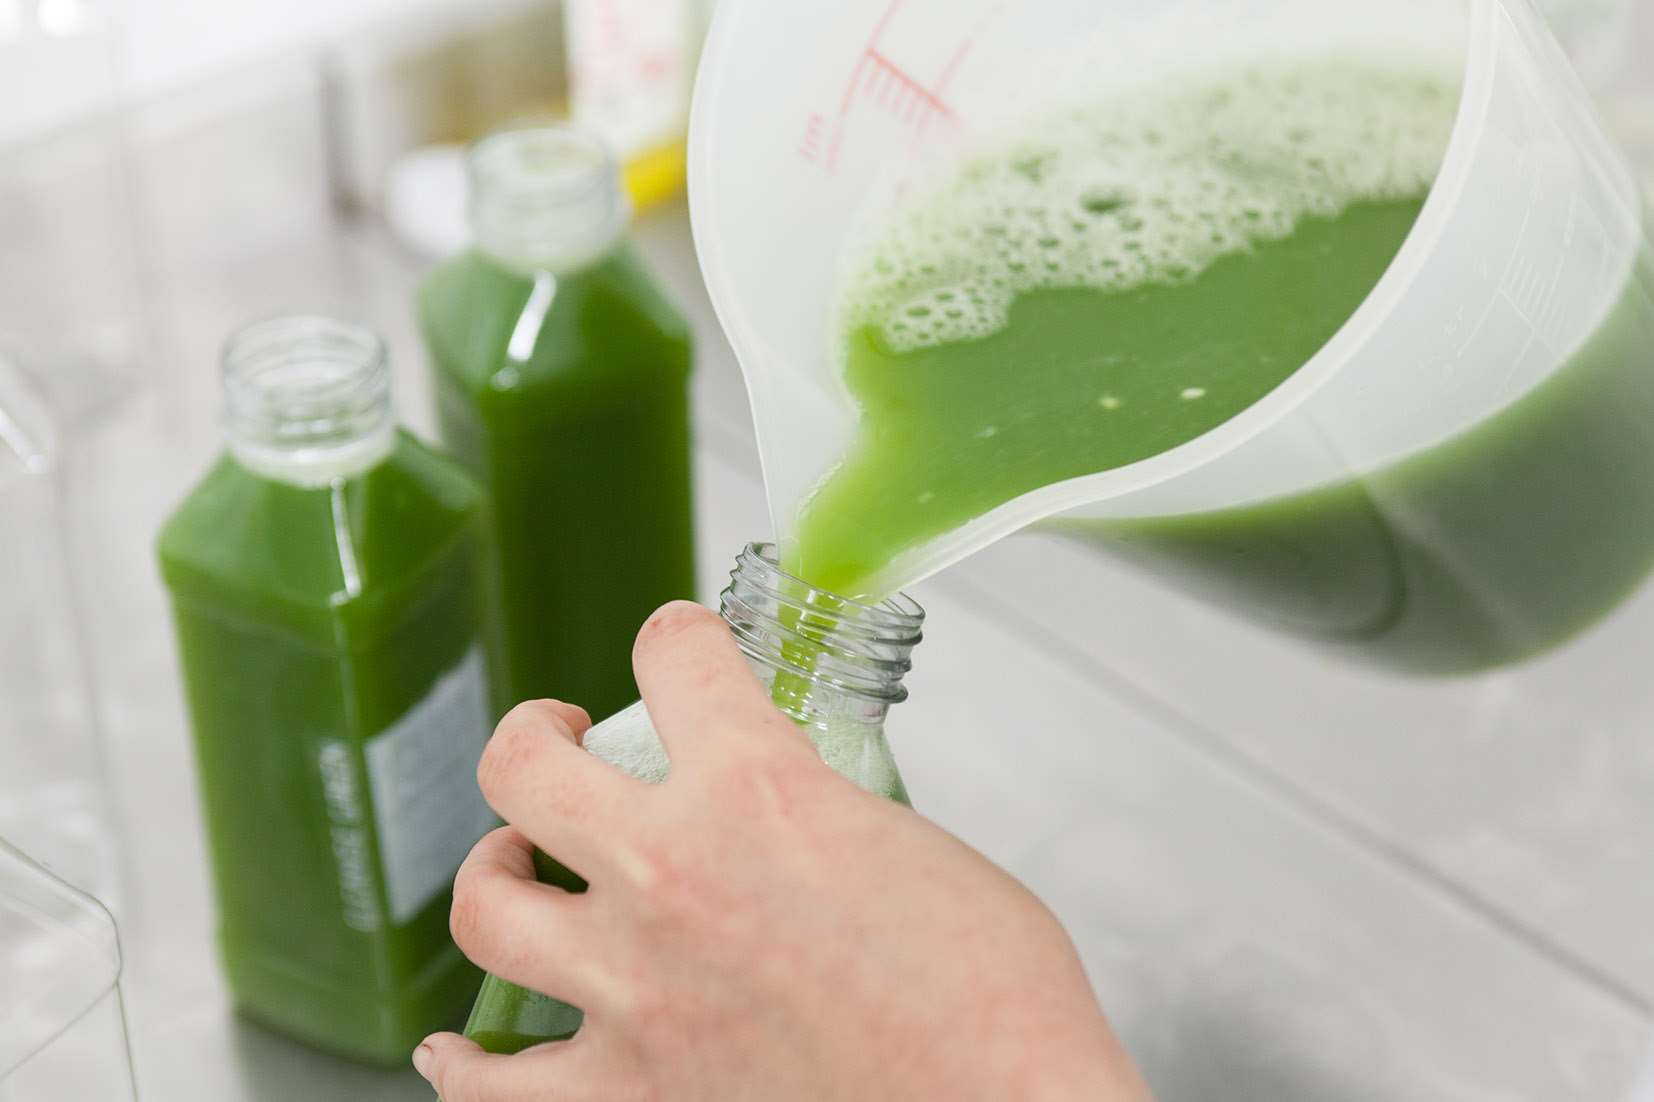 The Juice Executive makes cold pressed juices